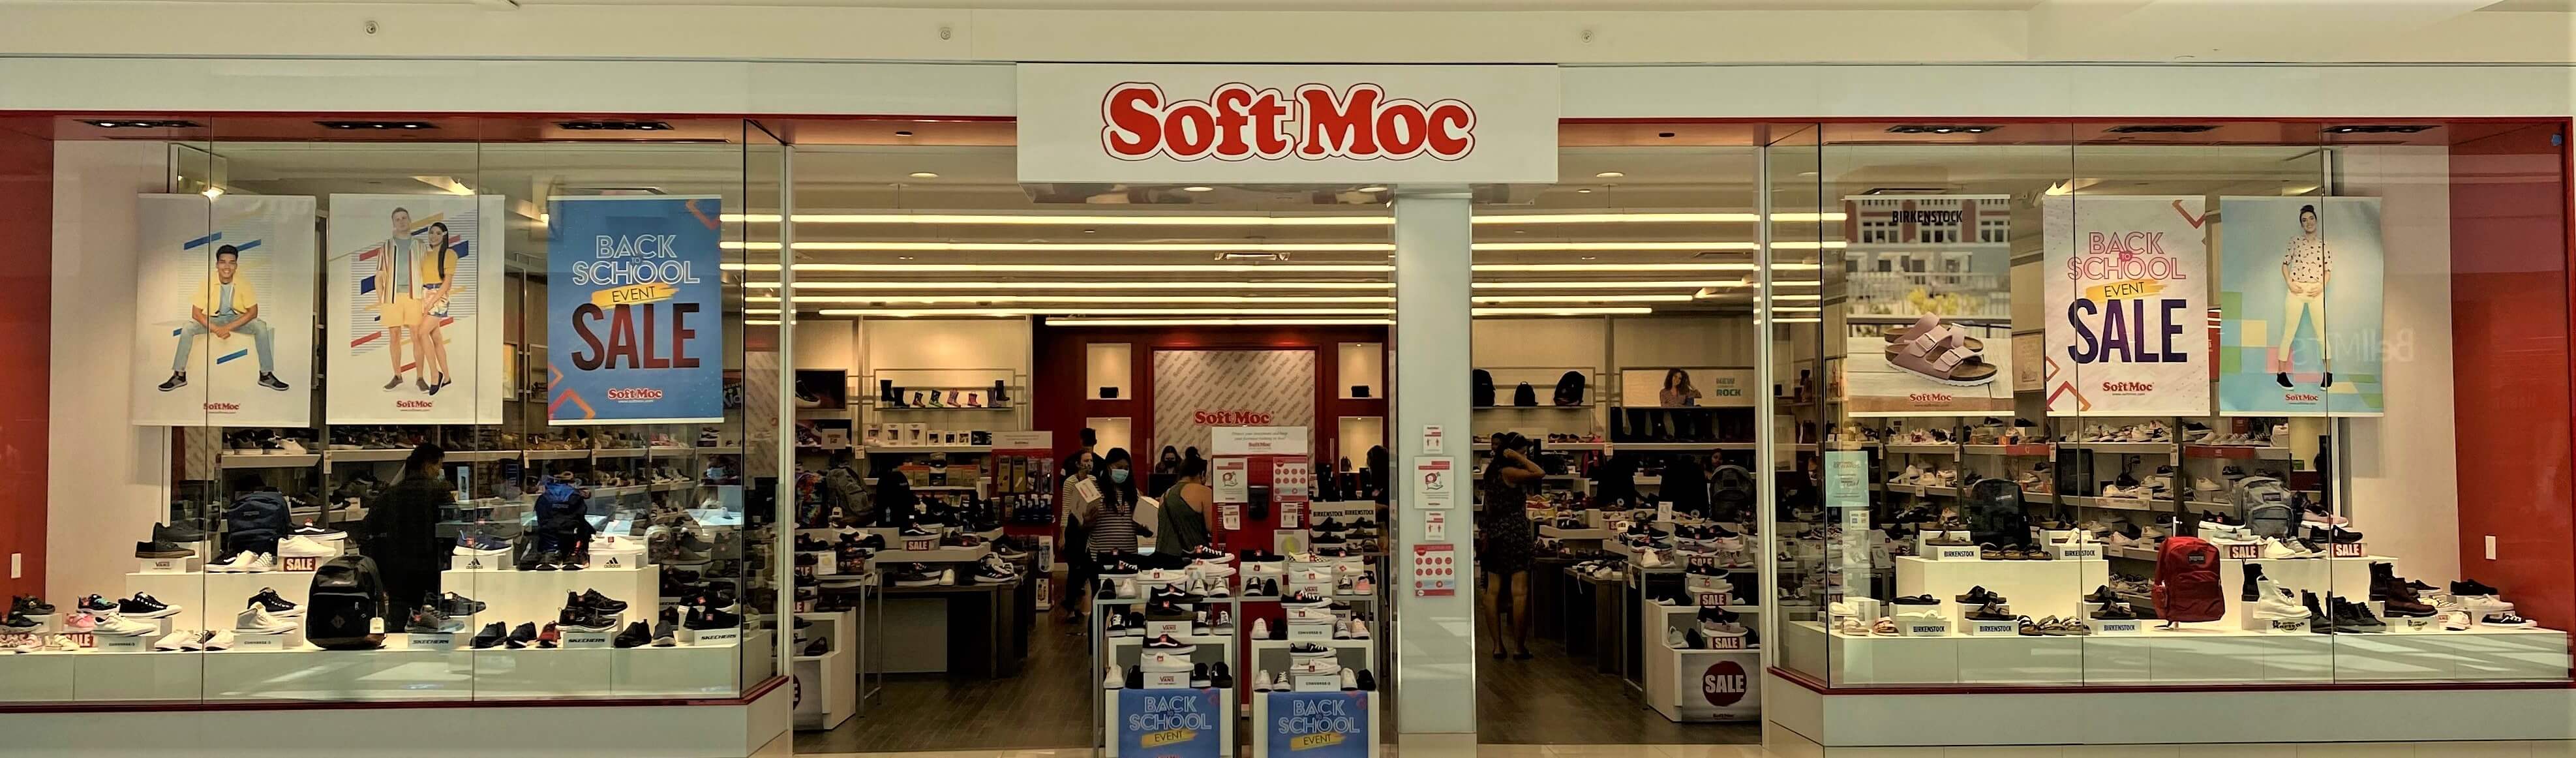 SoftMoc is Lifestyle